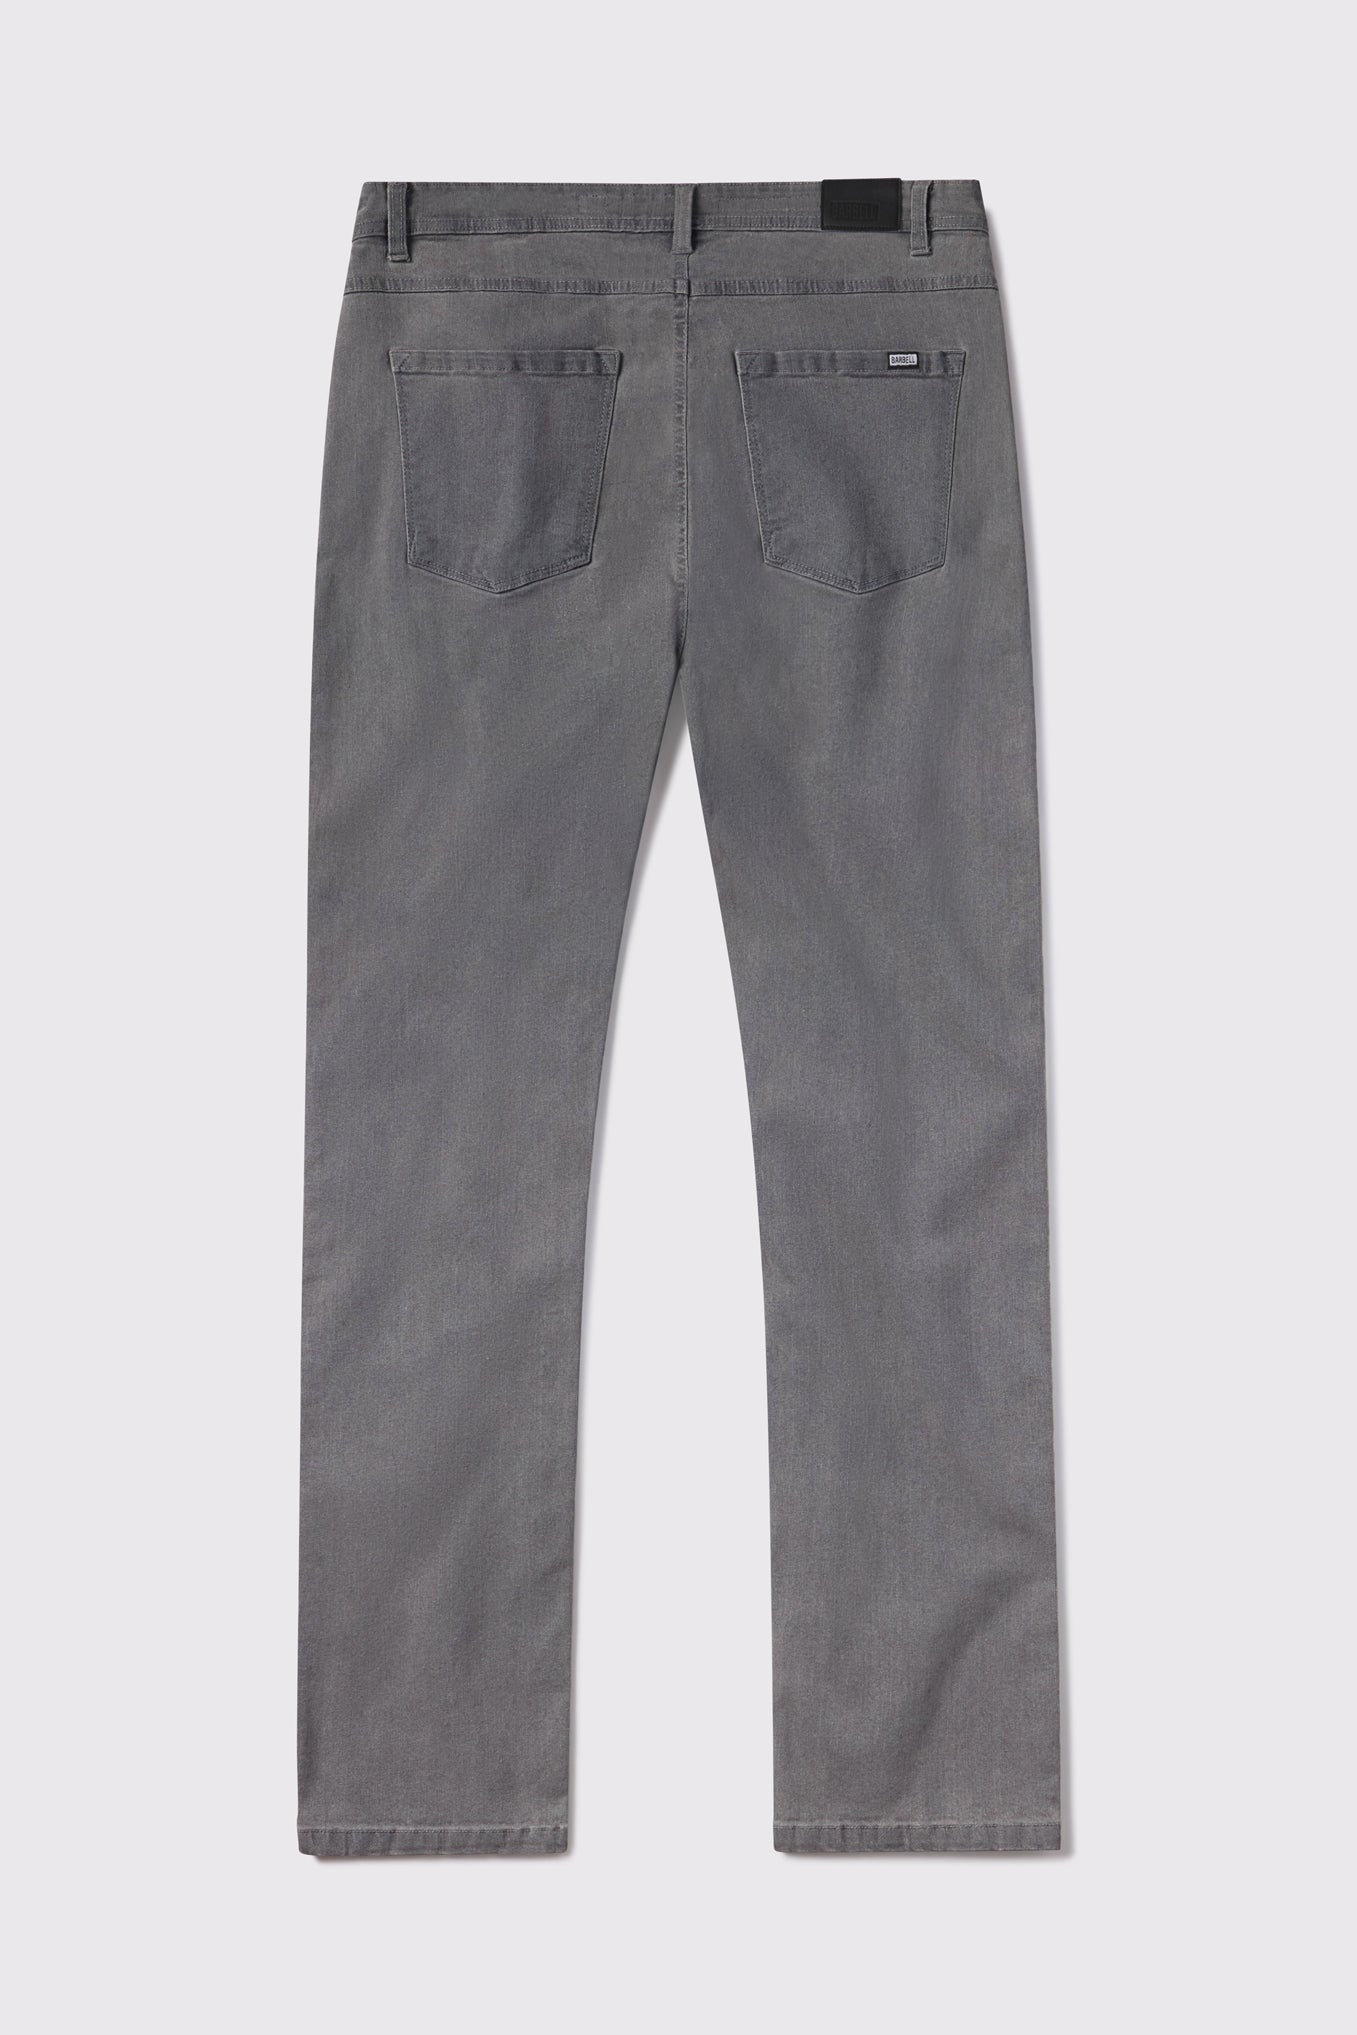 Mens Boot Cut Athletic Fit Jeans 2.0 -Cement - photo from back flat lay #color_cement